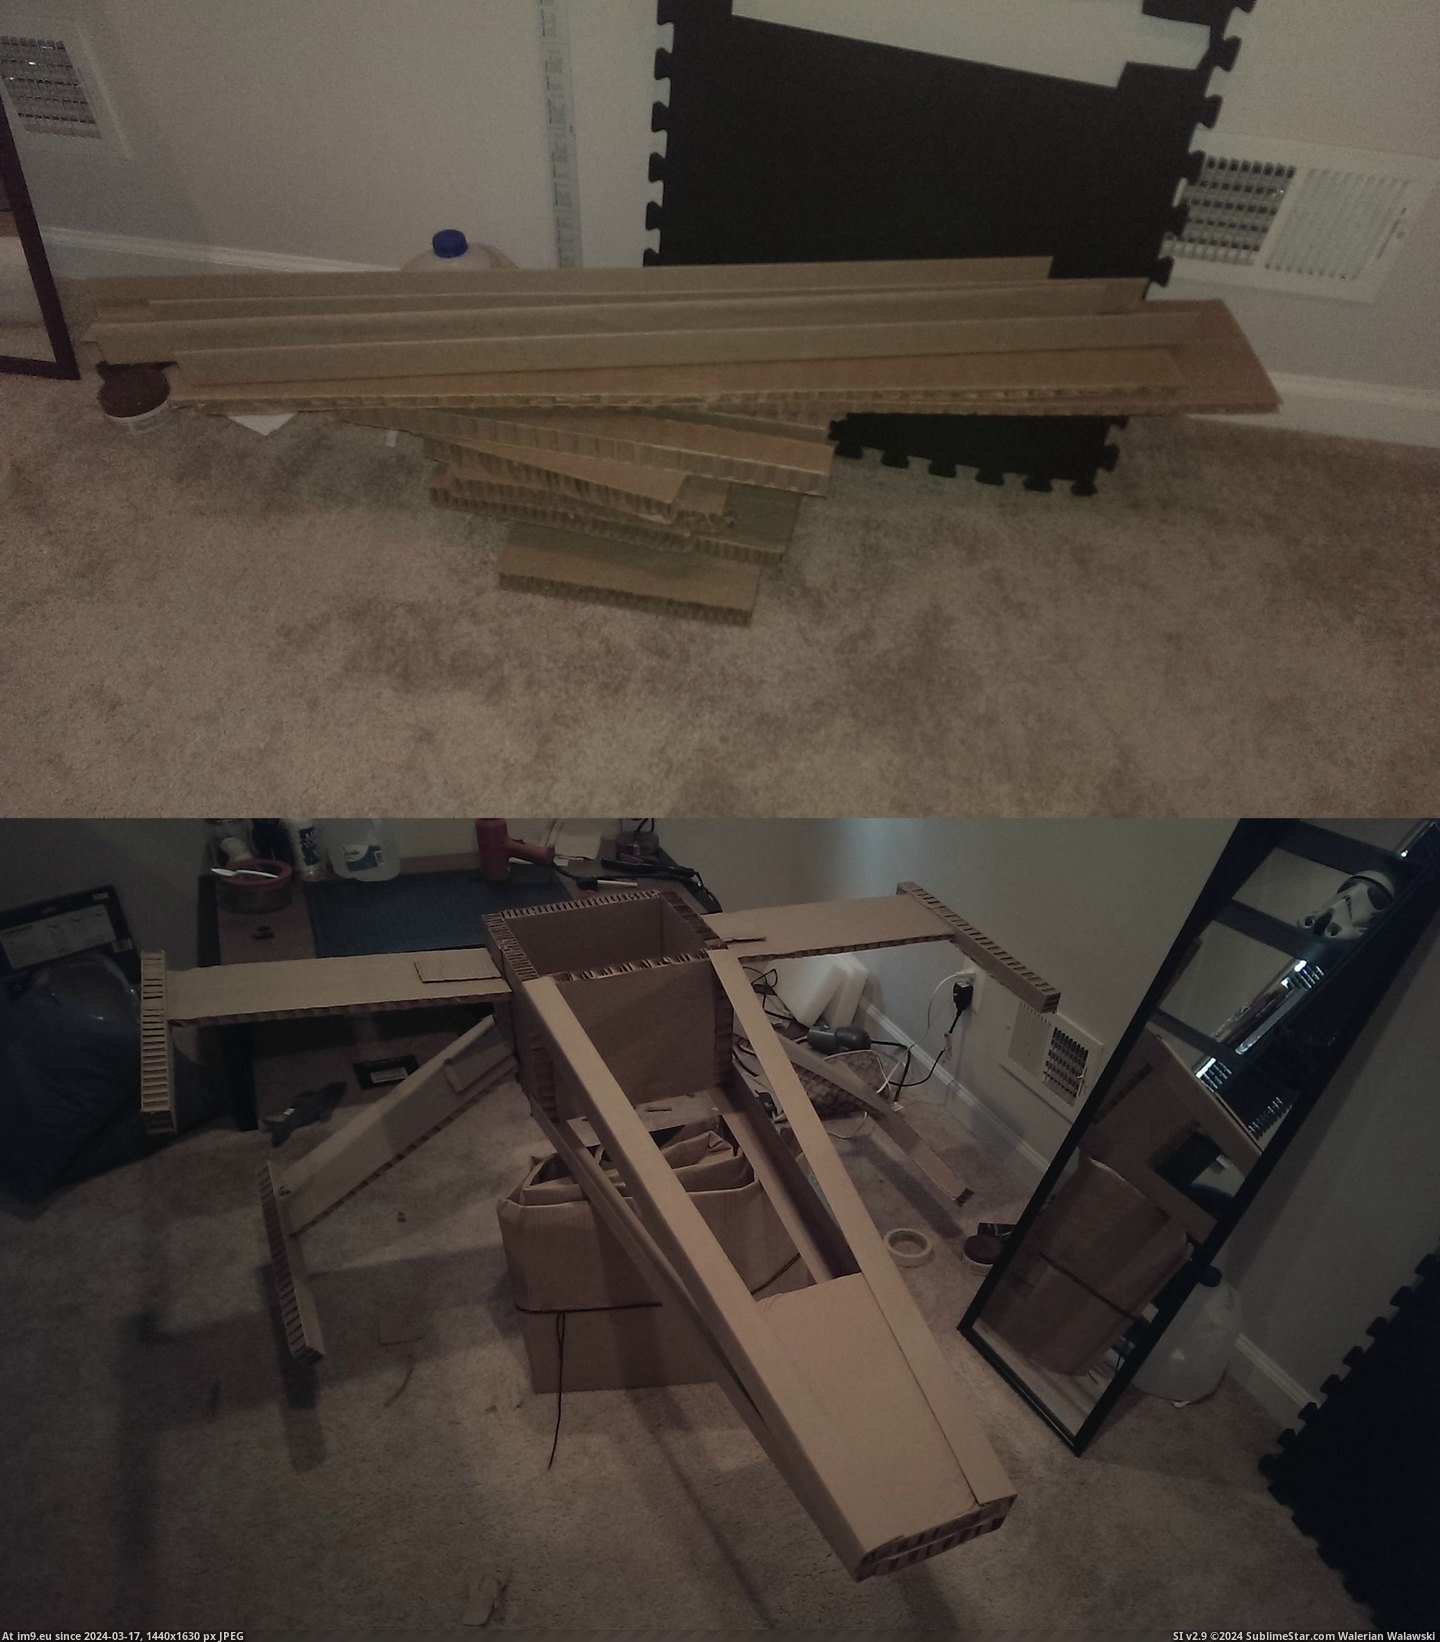 #Funny #Work #Bed #Girlfriend #Leaving #Throw #Stuffs #Did #Box #Asked #Packaging [Funny] Girlfriend asked me to throw away the box and packaging stuffs from our new bed frame before leaving for work, I did her Pic. (Image of album My r/FUNNY favs))